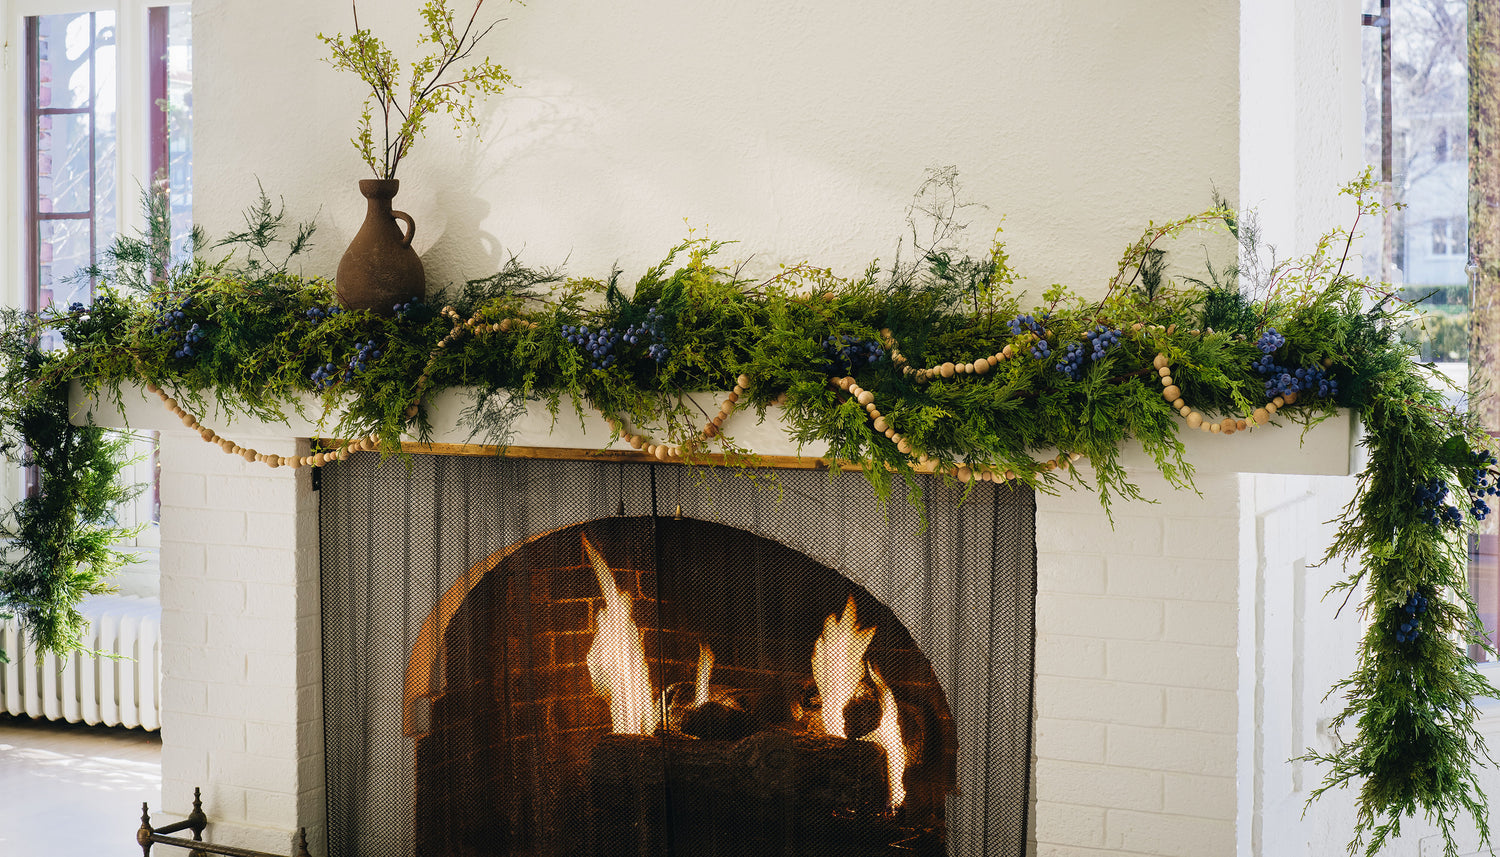 Choosing the right Christmas greenery for your holiday decor